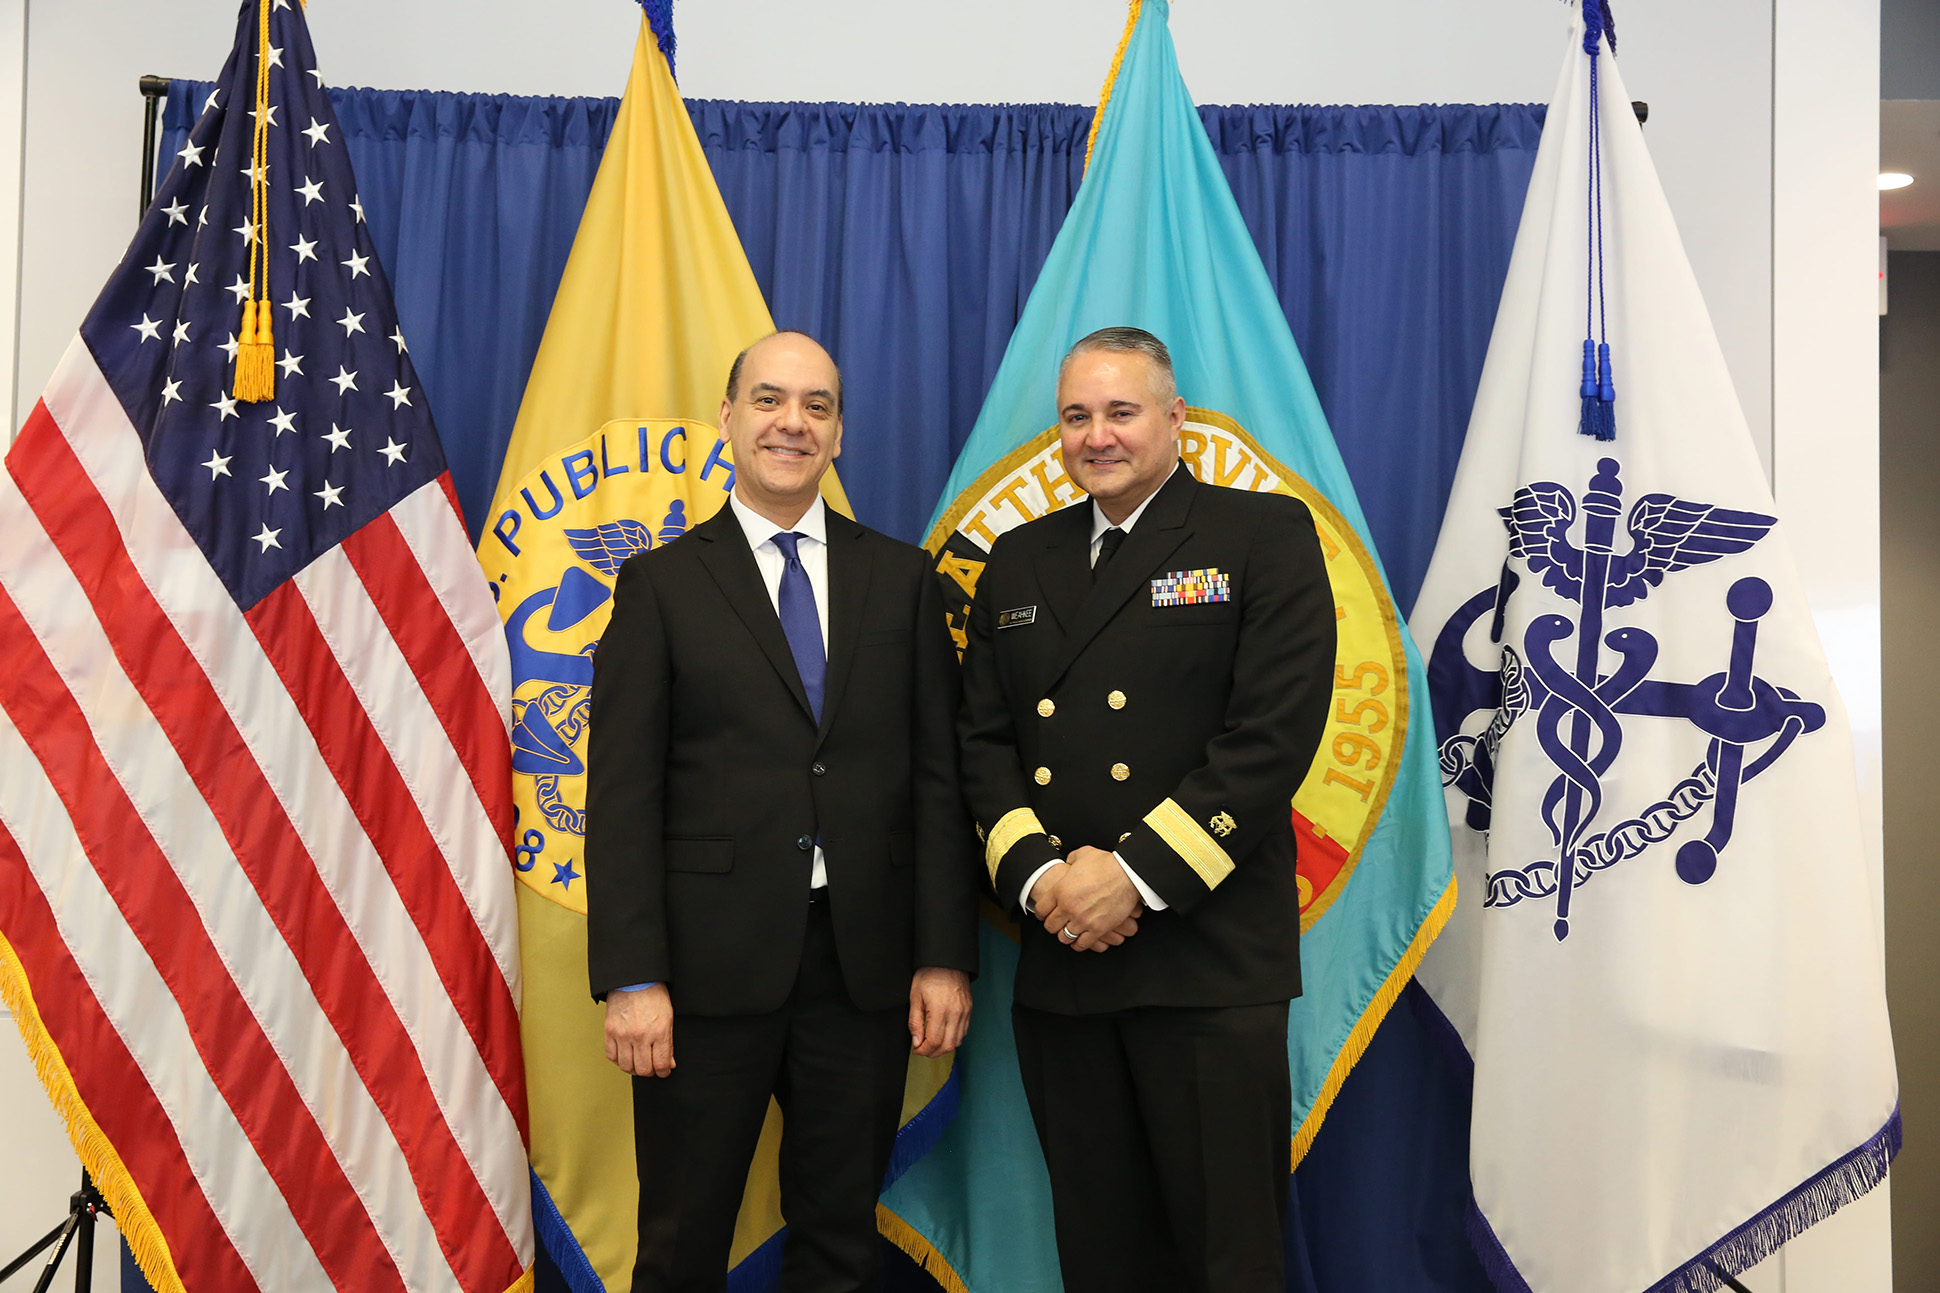 Group Photos - Gary Mosier and RADM Michael Weahkee